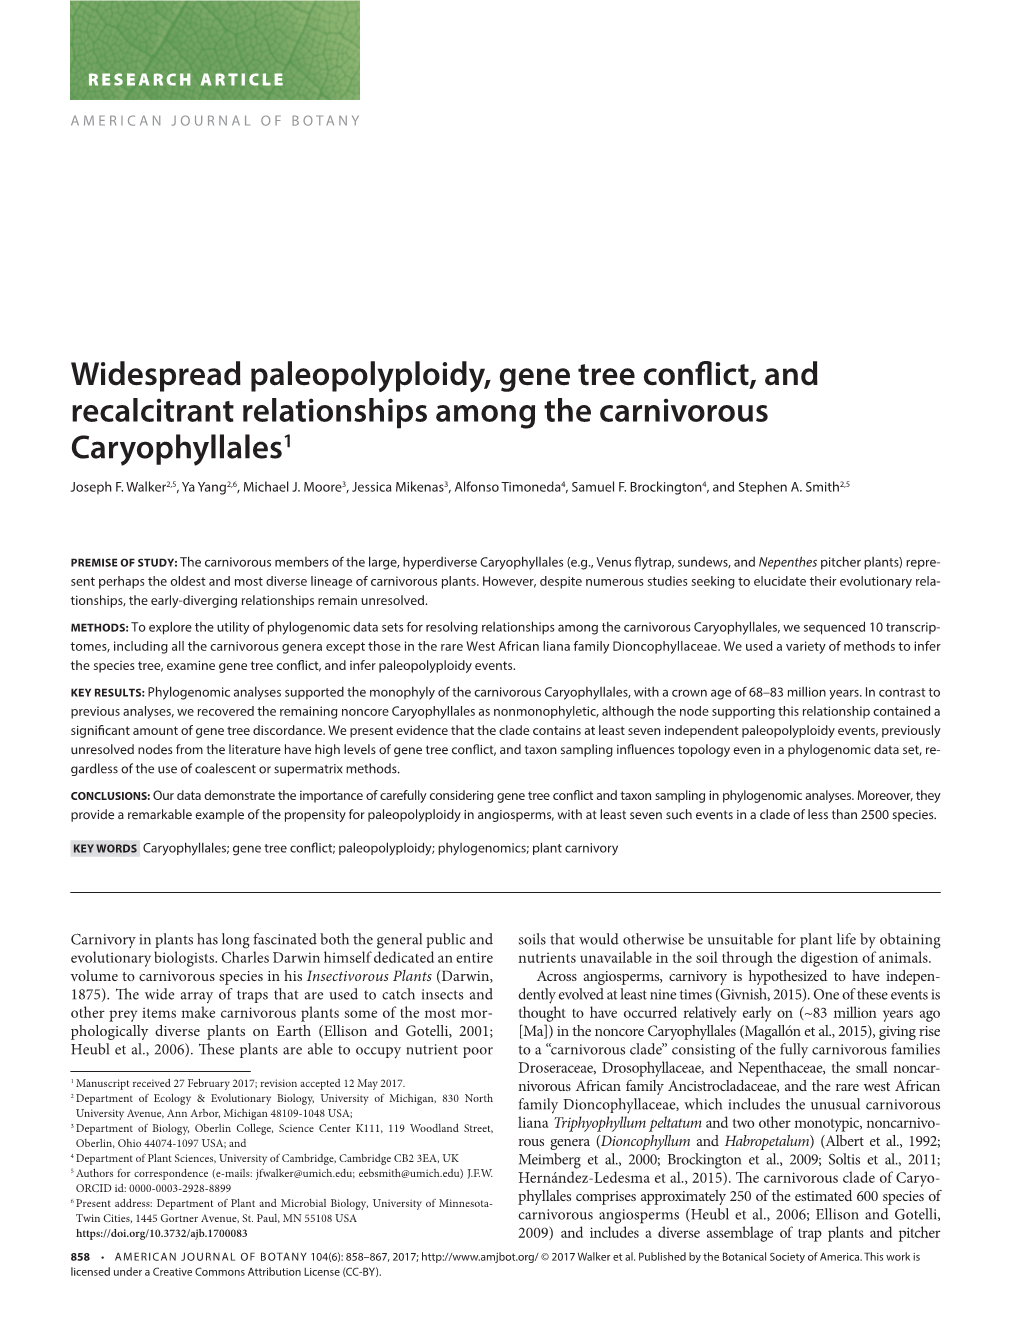 Widespread Paleopolyploidy, Gene Tree Conflict, And